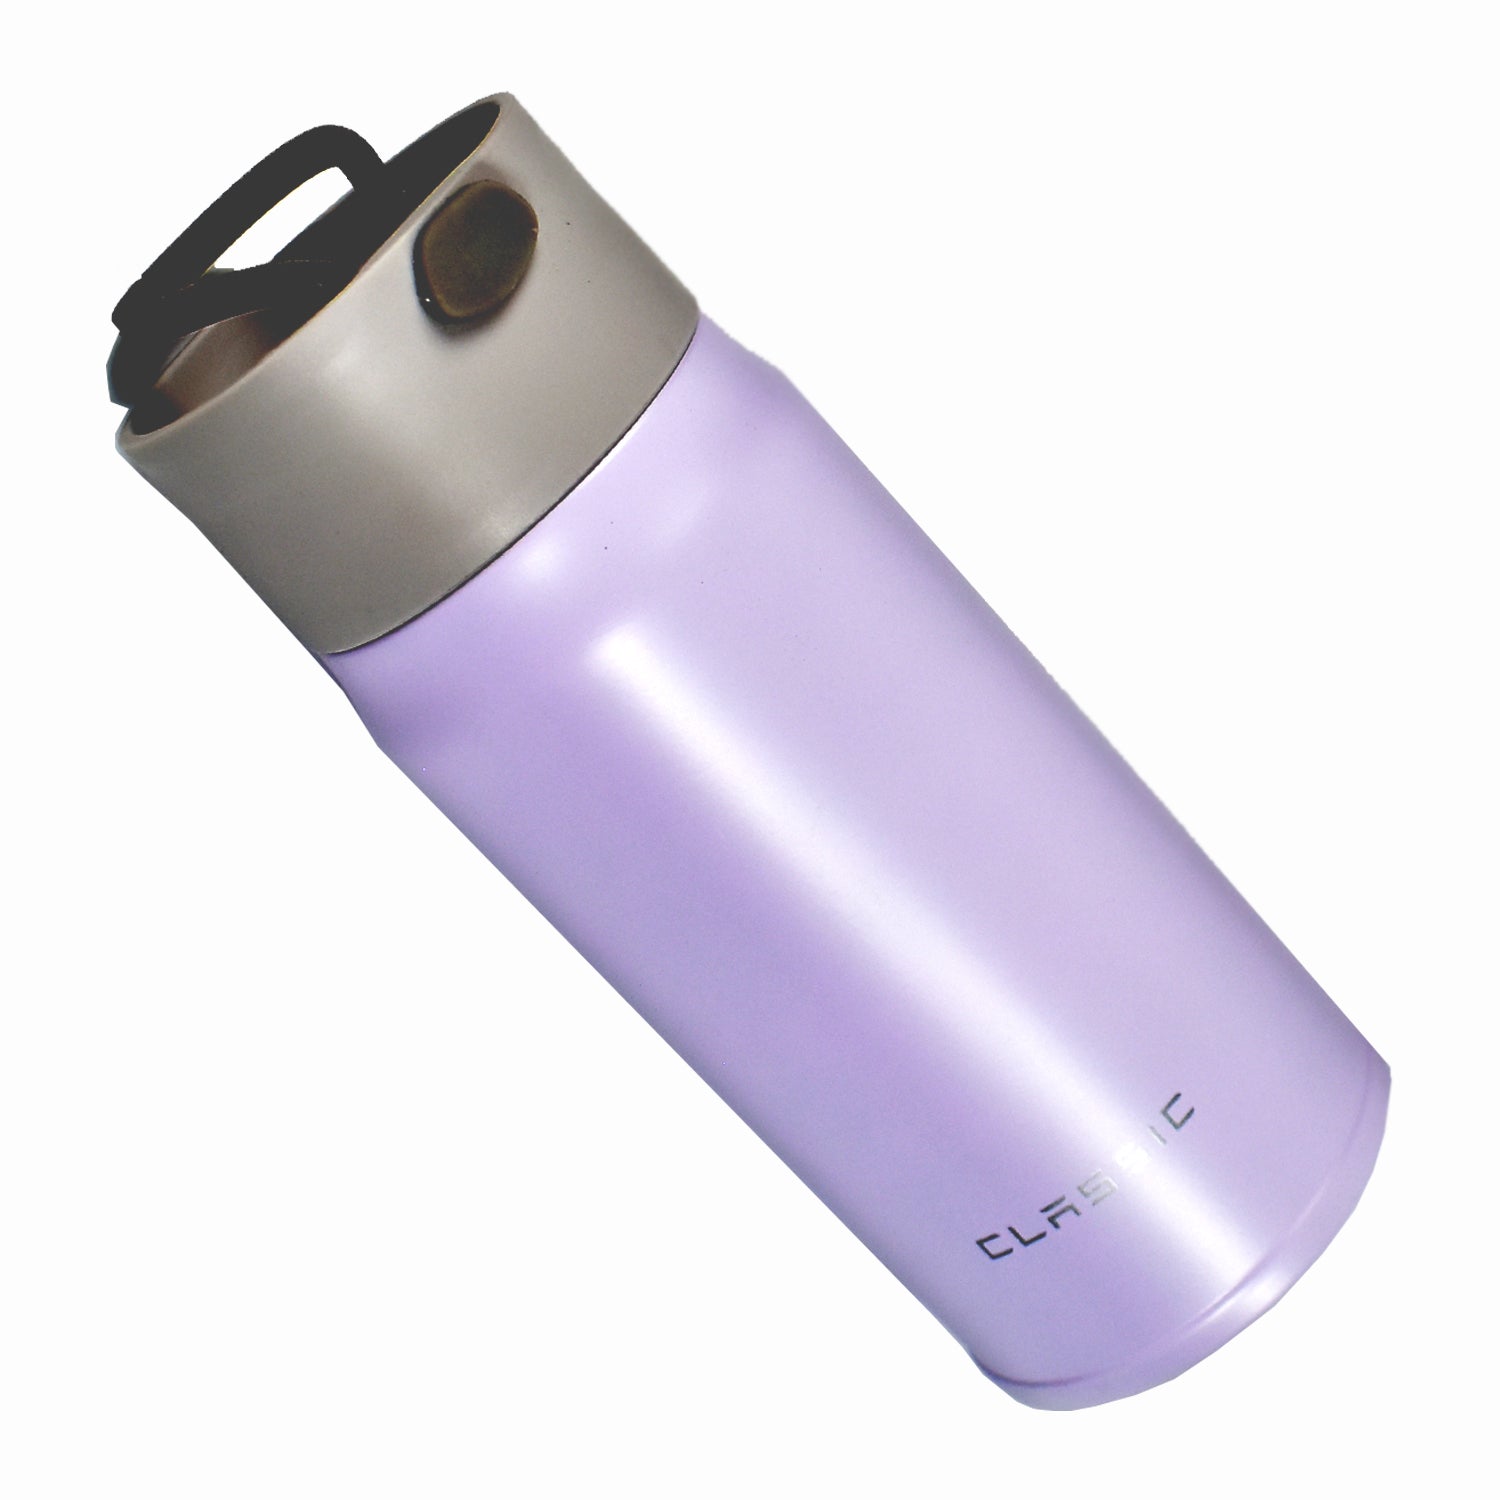 6829 Hygienic Stainless Steel Inside and Outside | Stainless Steel Water Bottle for Daily Use | Water Bottle for Office, School, Home - 310 ml DeoDap